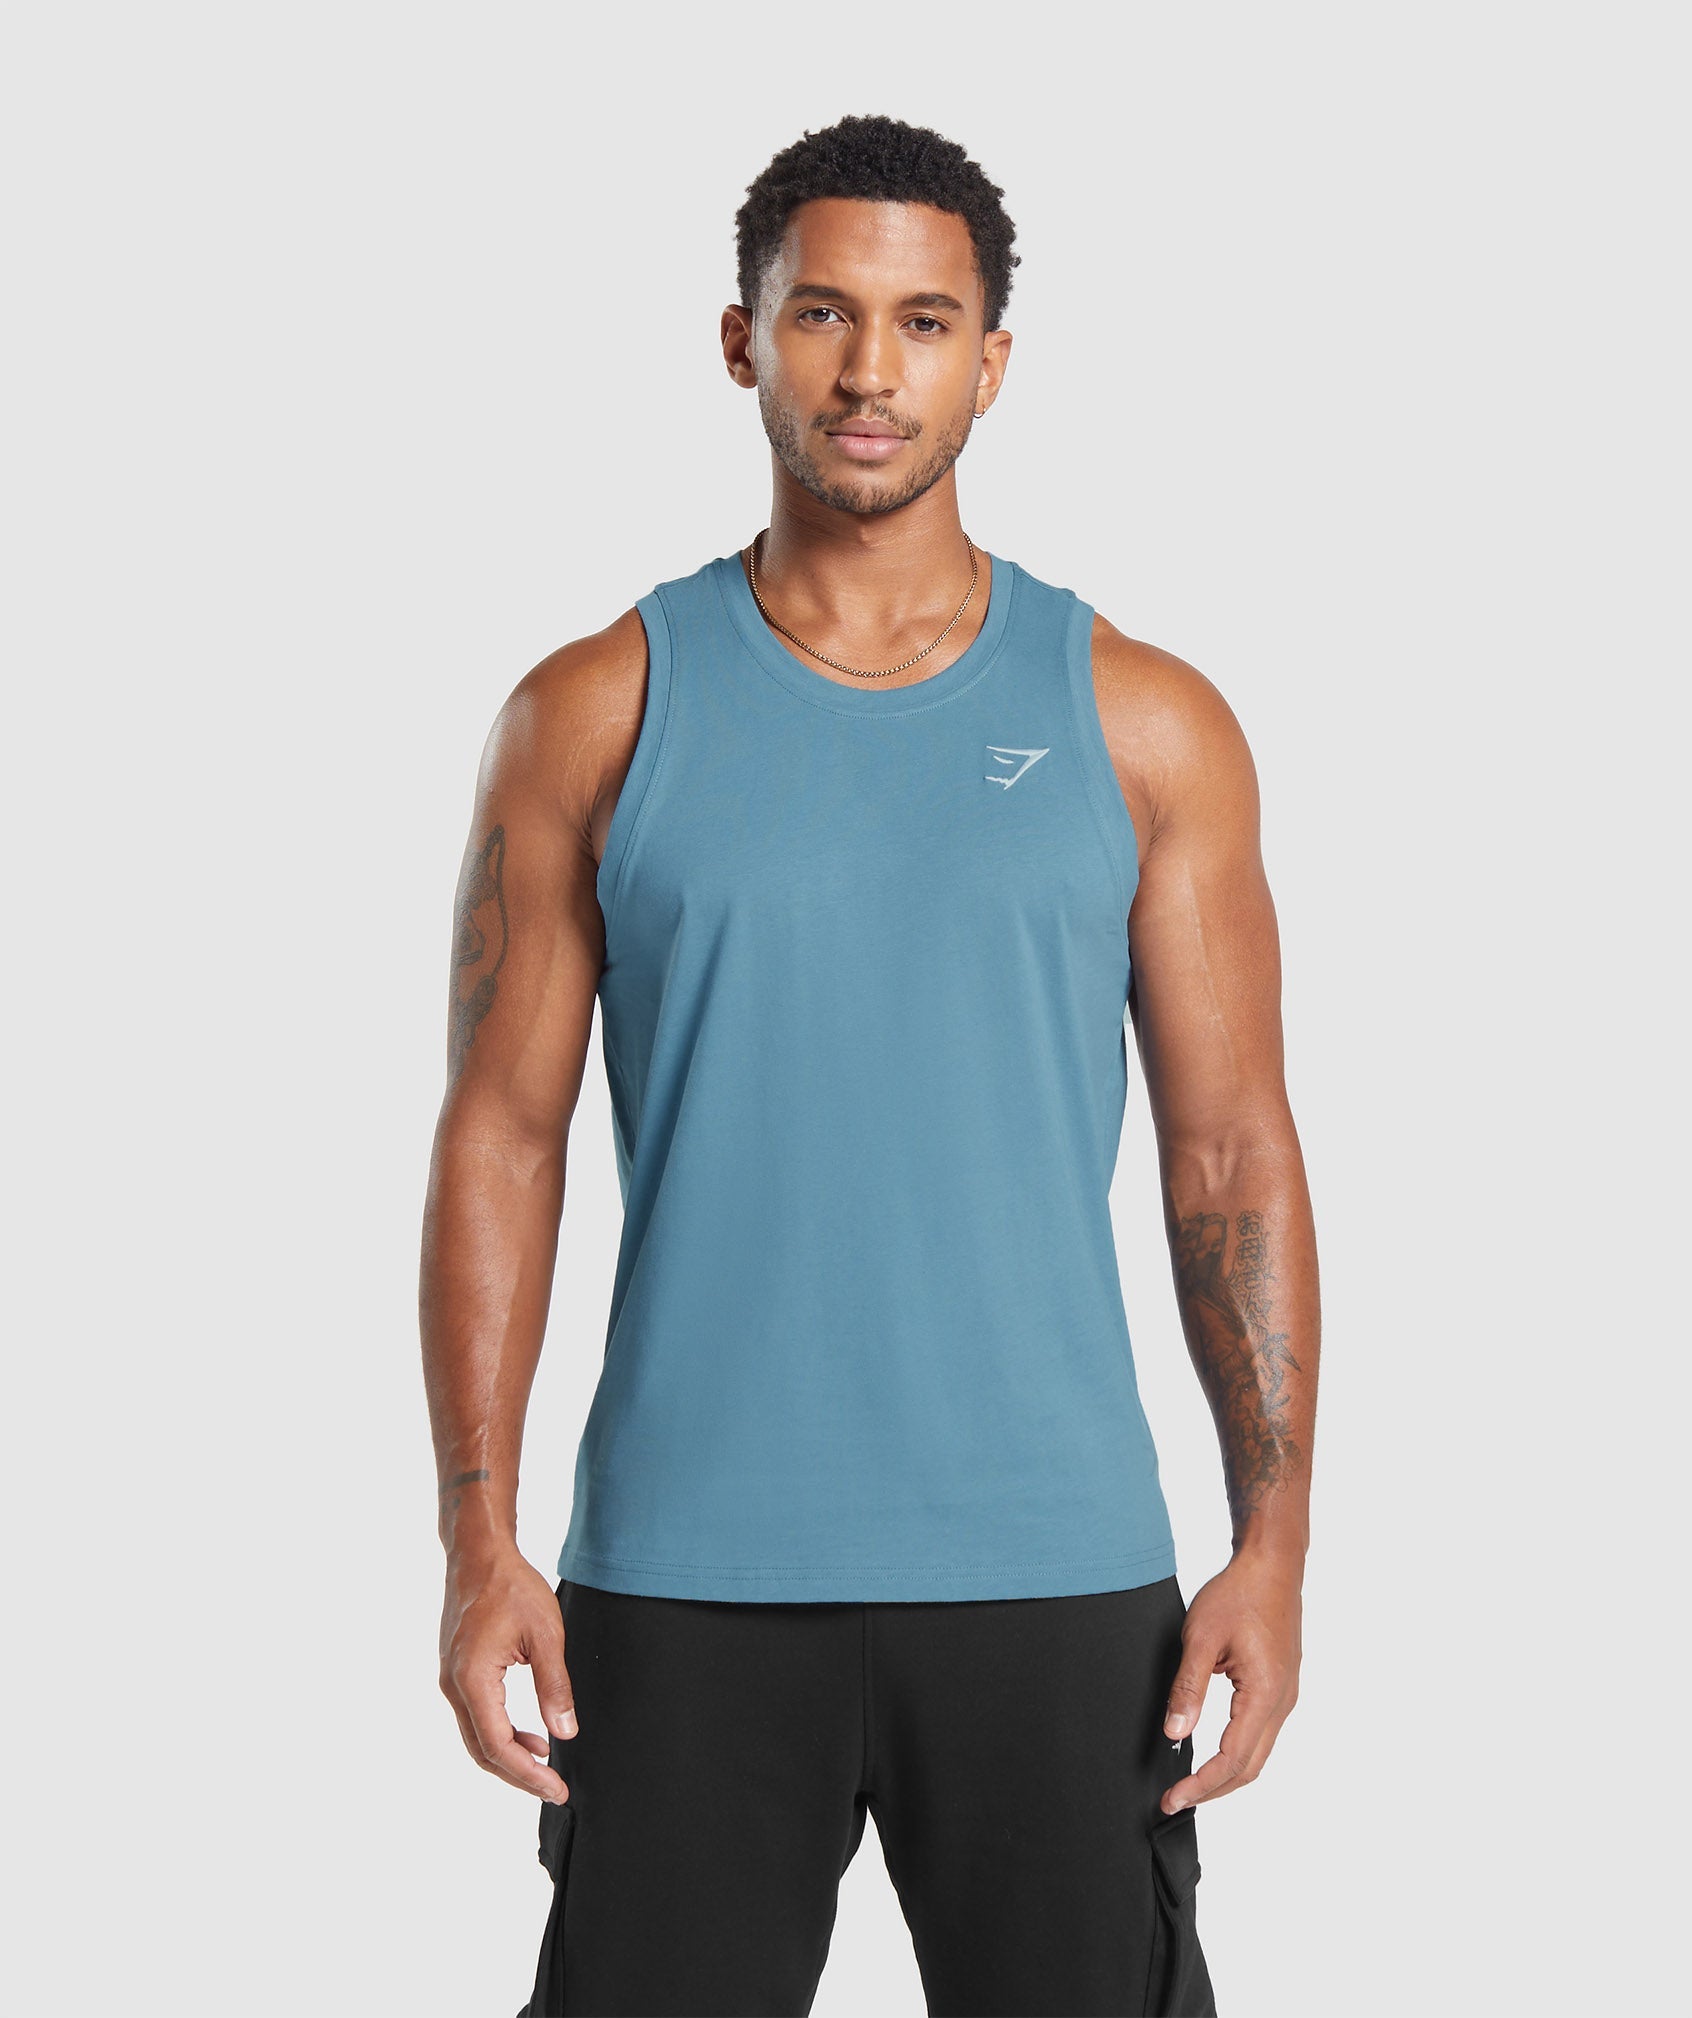 Crest Tank in Faded Blue - view 1